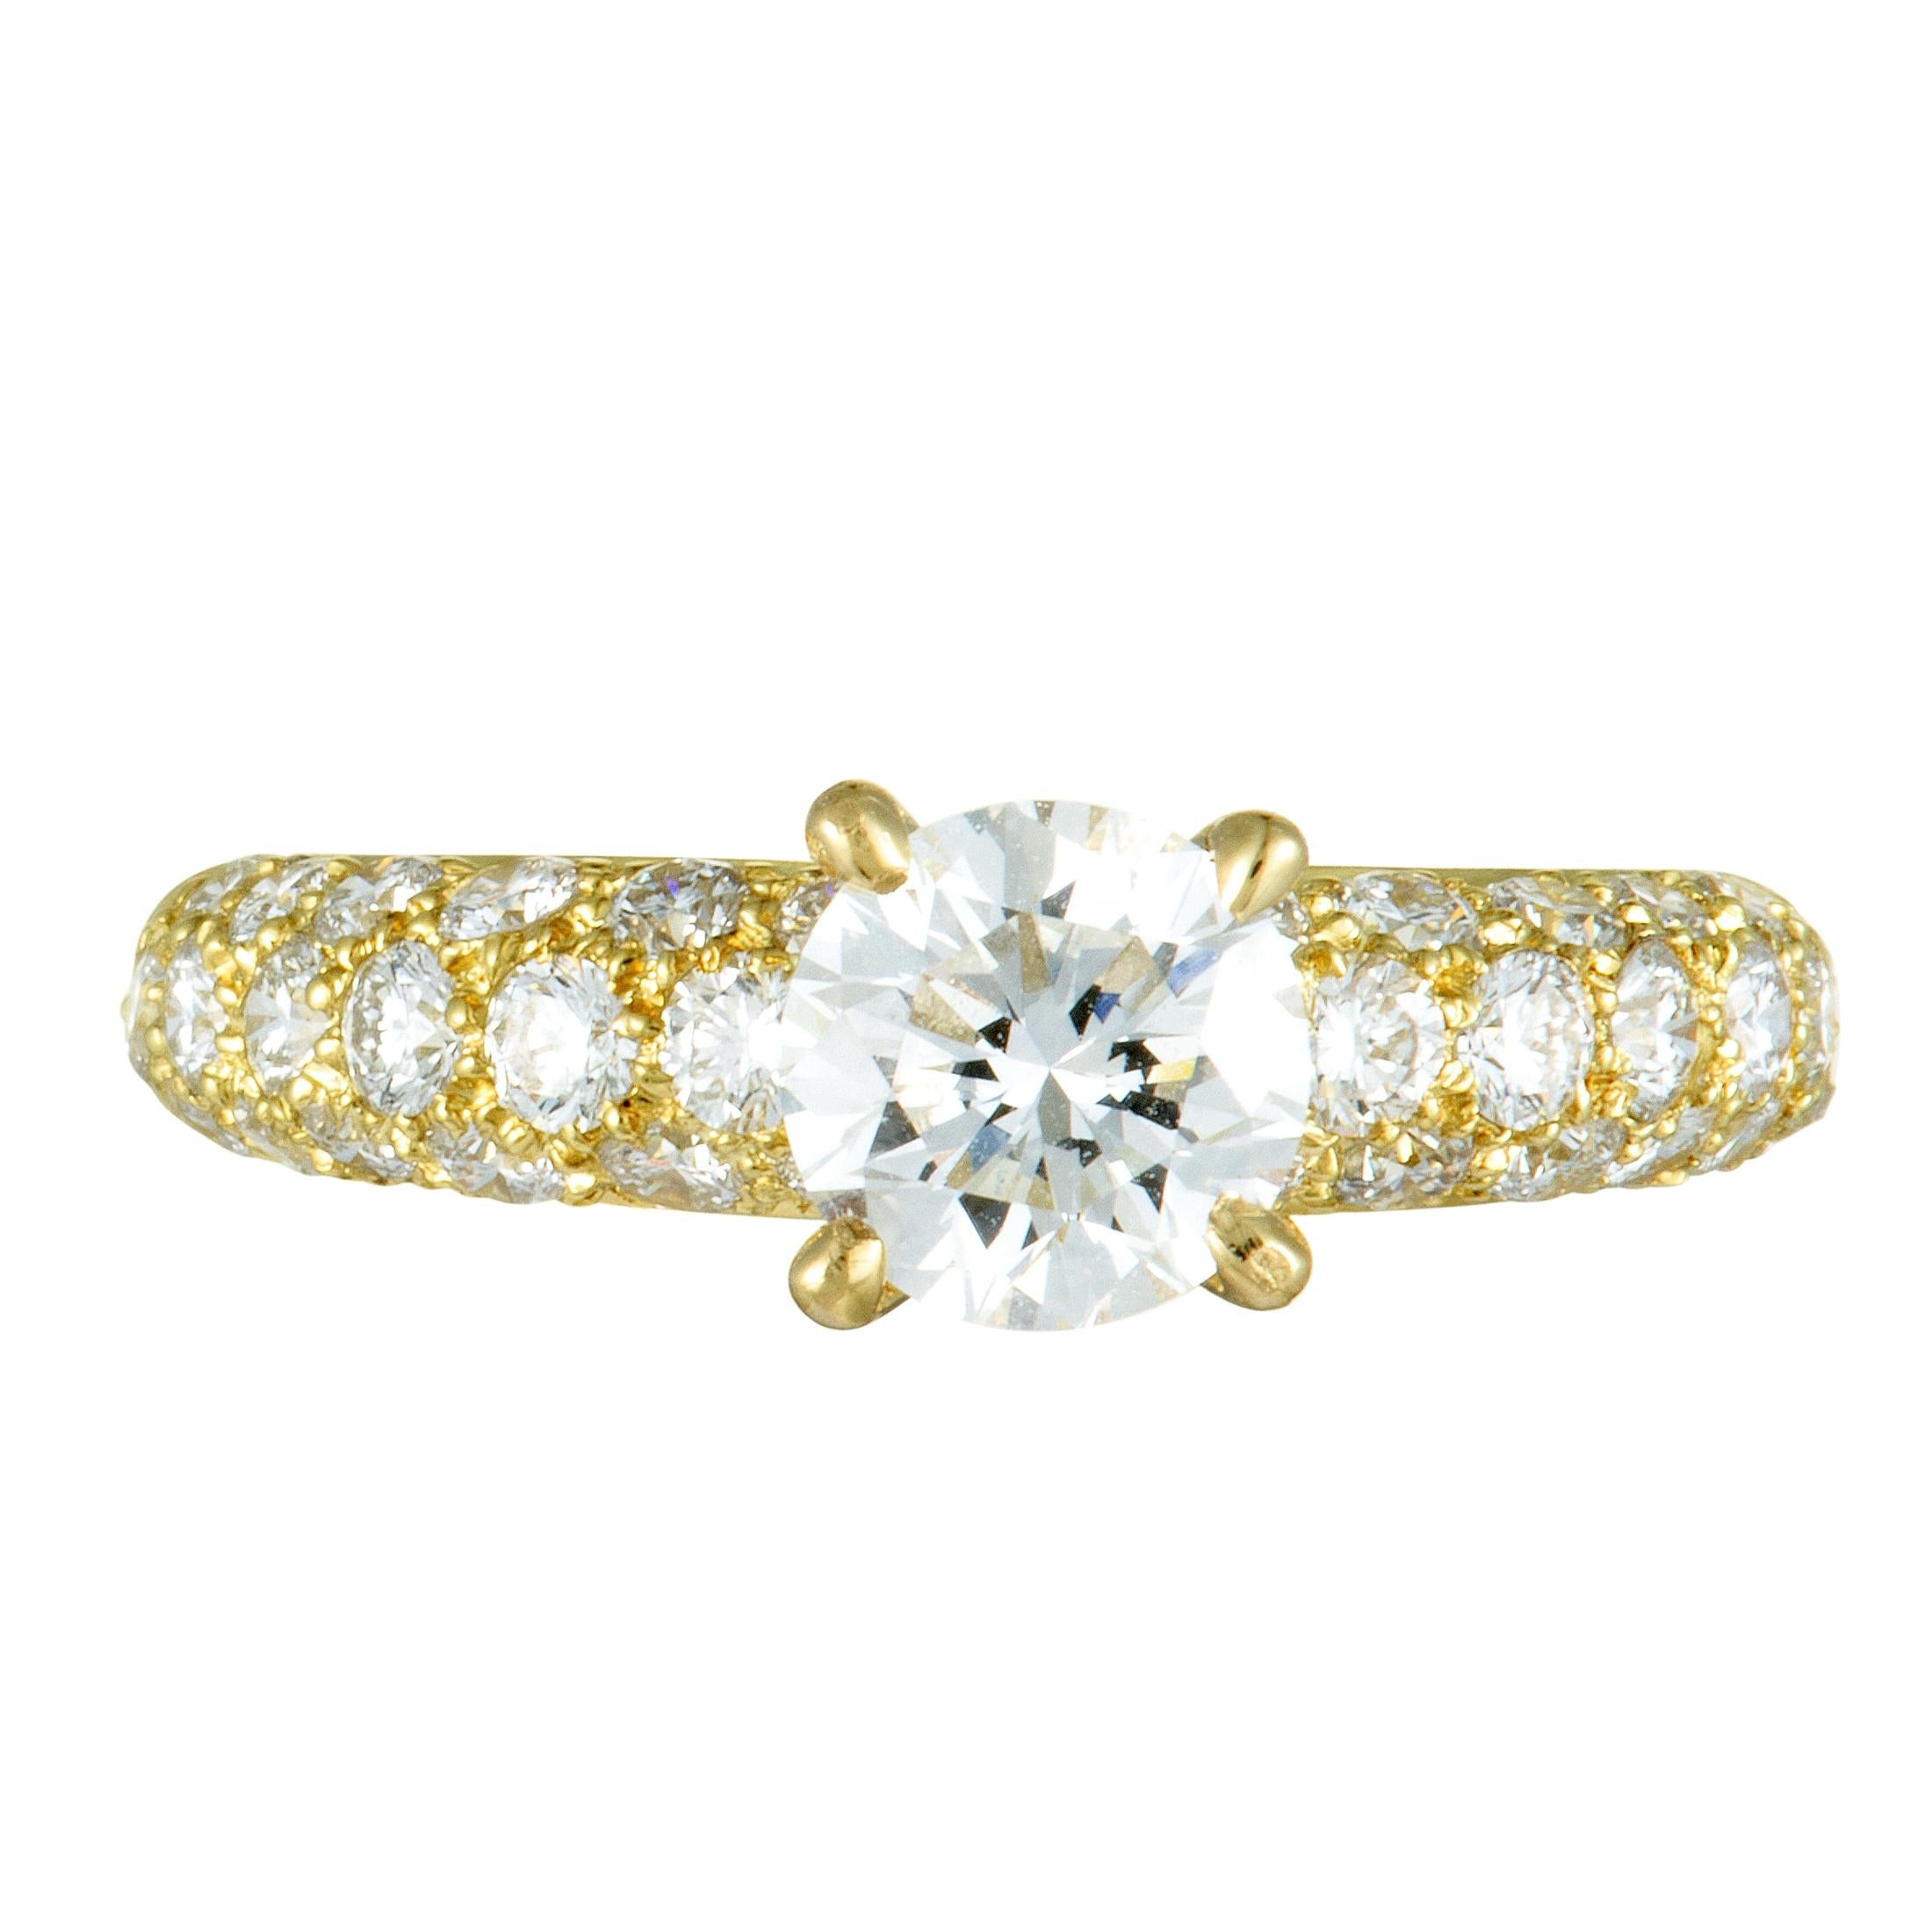 Women's Van Cleef & Arpels Diamond Pave and Diamond Solitaire Yellow Gold Ring